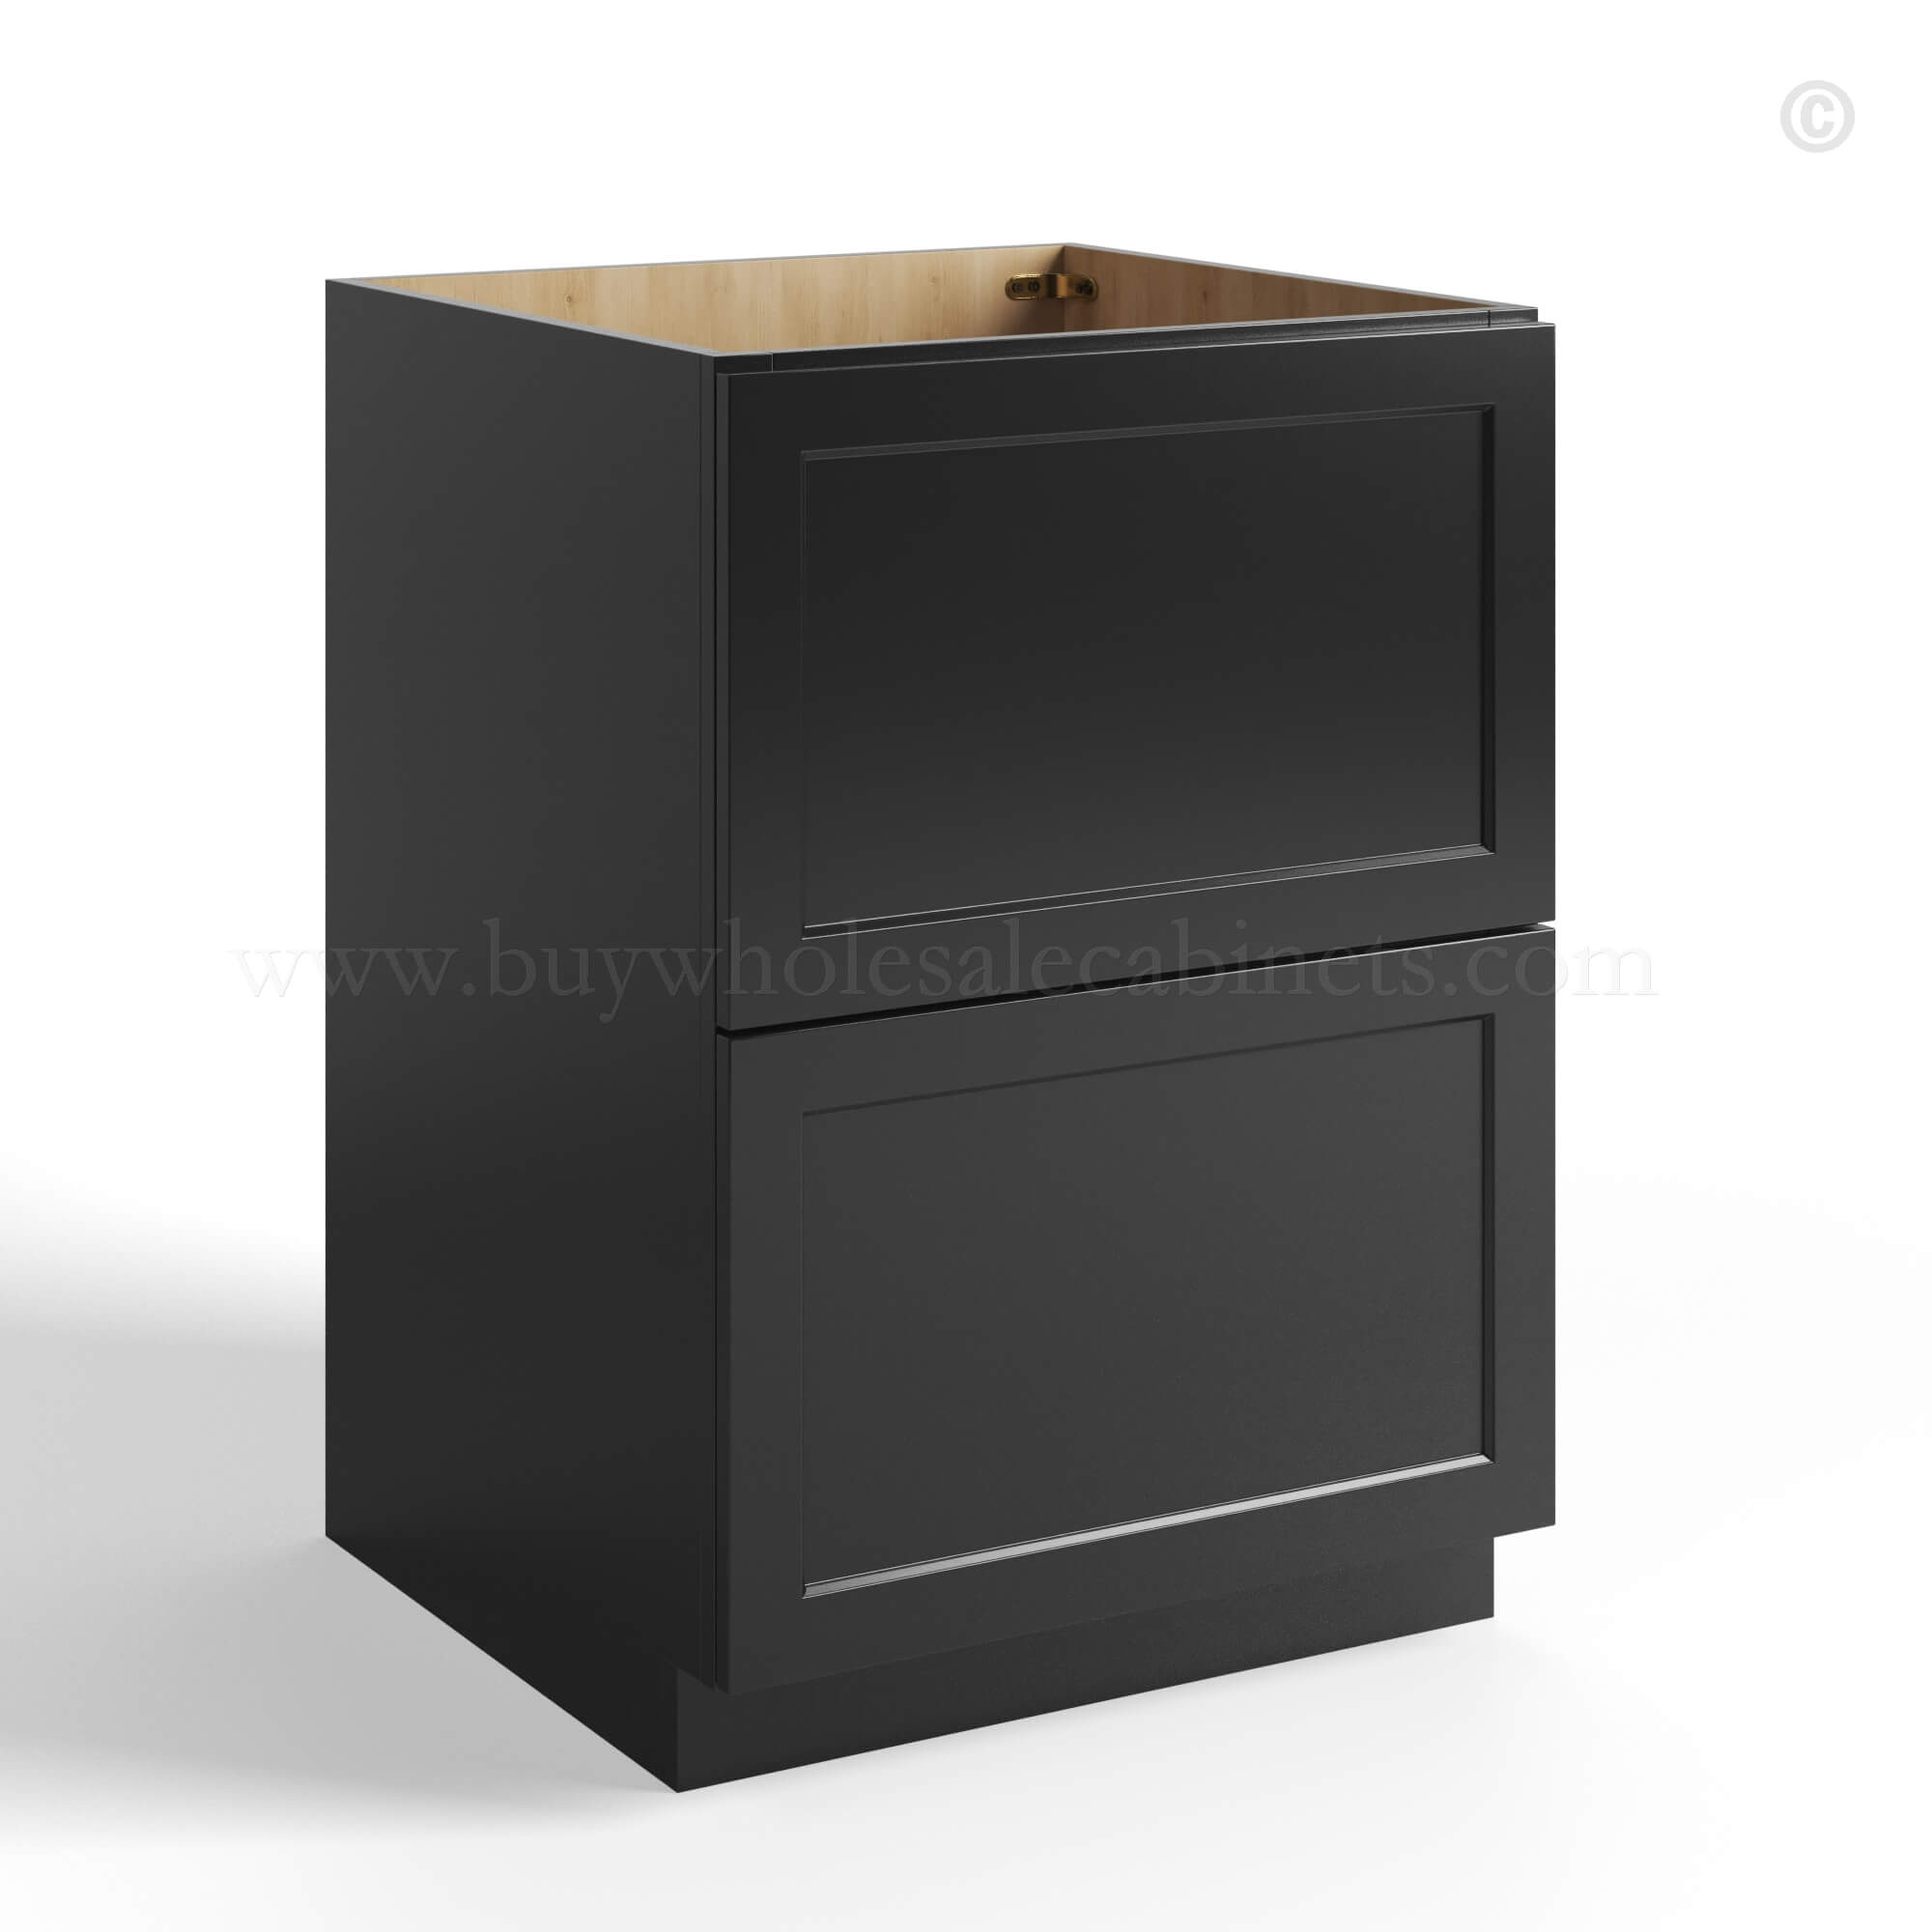 Black Shaker Base Cabinet with 2 Drawers, rta cabinets, wholesale cabinets